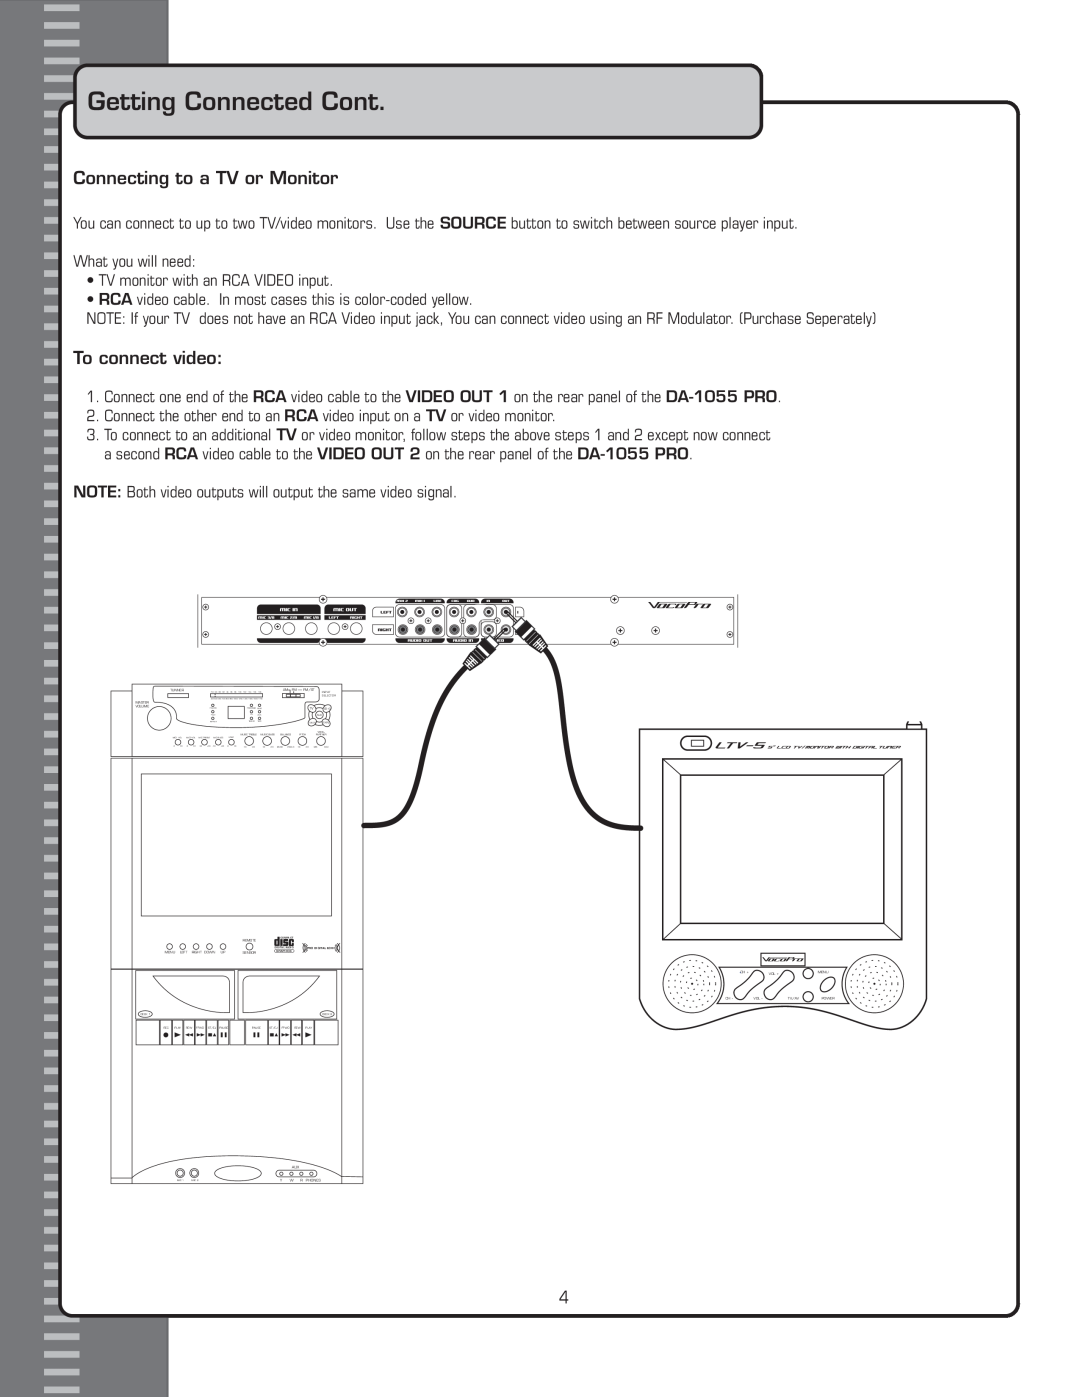 VocoPro DA-1055 PRO owner manual Getting Connected Cont, Connecting to a TV or Monitor, To connect video 